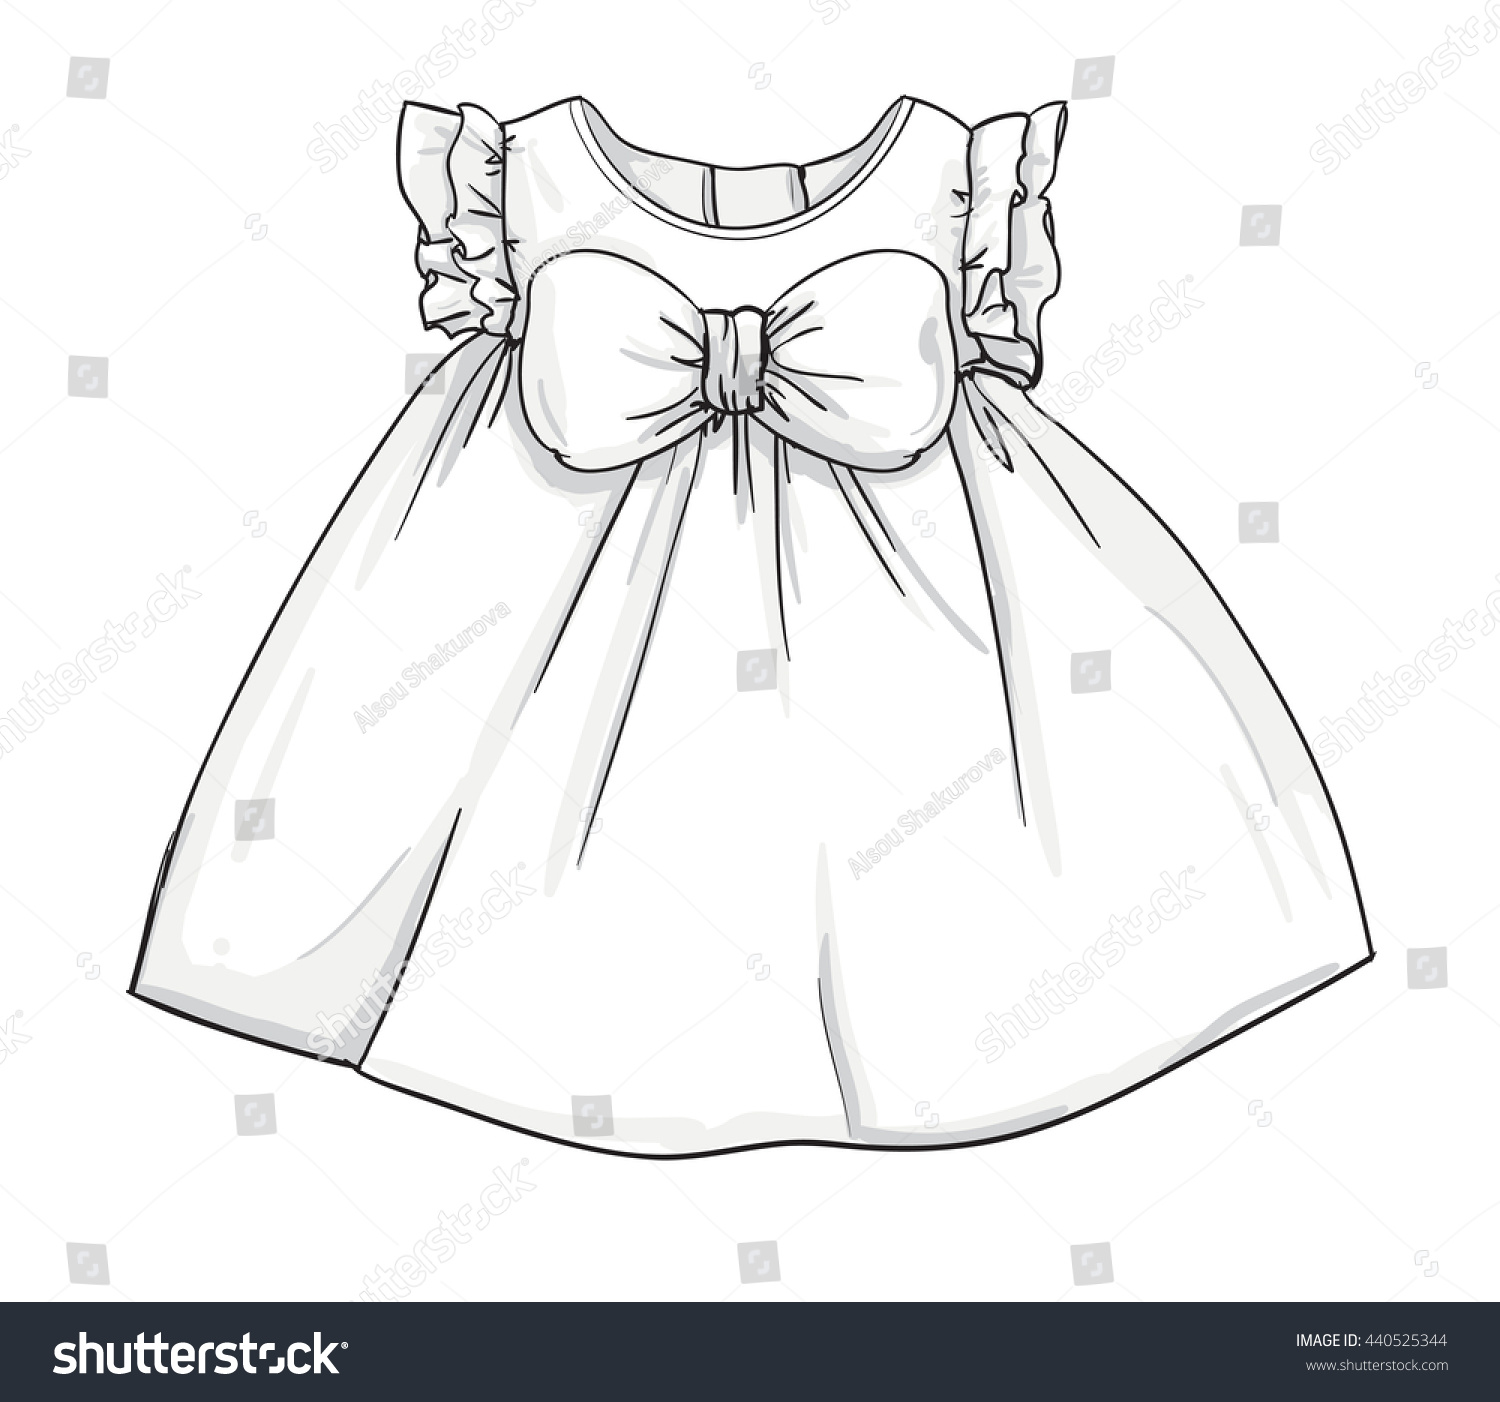 Download Baby Fashion Baby Clothing Vector Illustration Stock ...